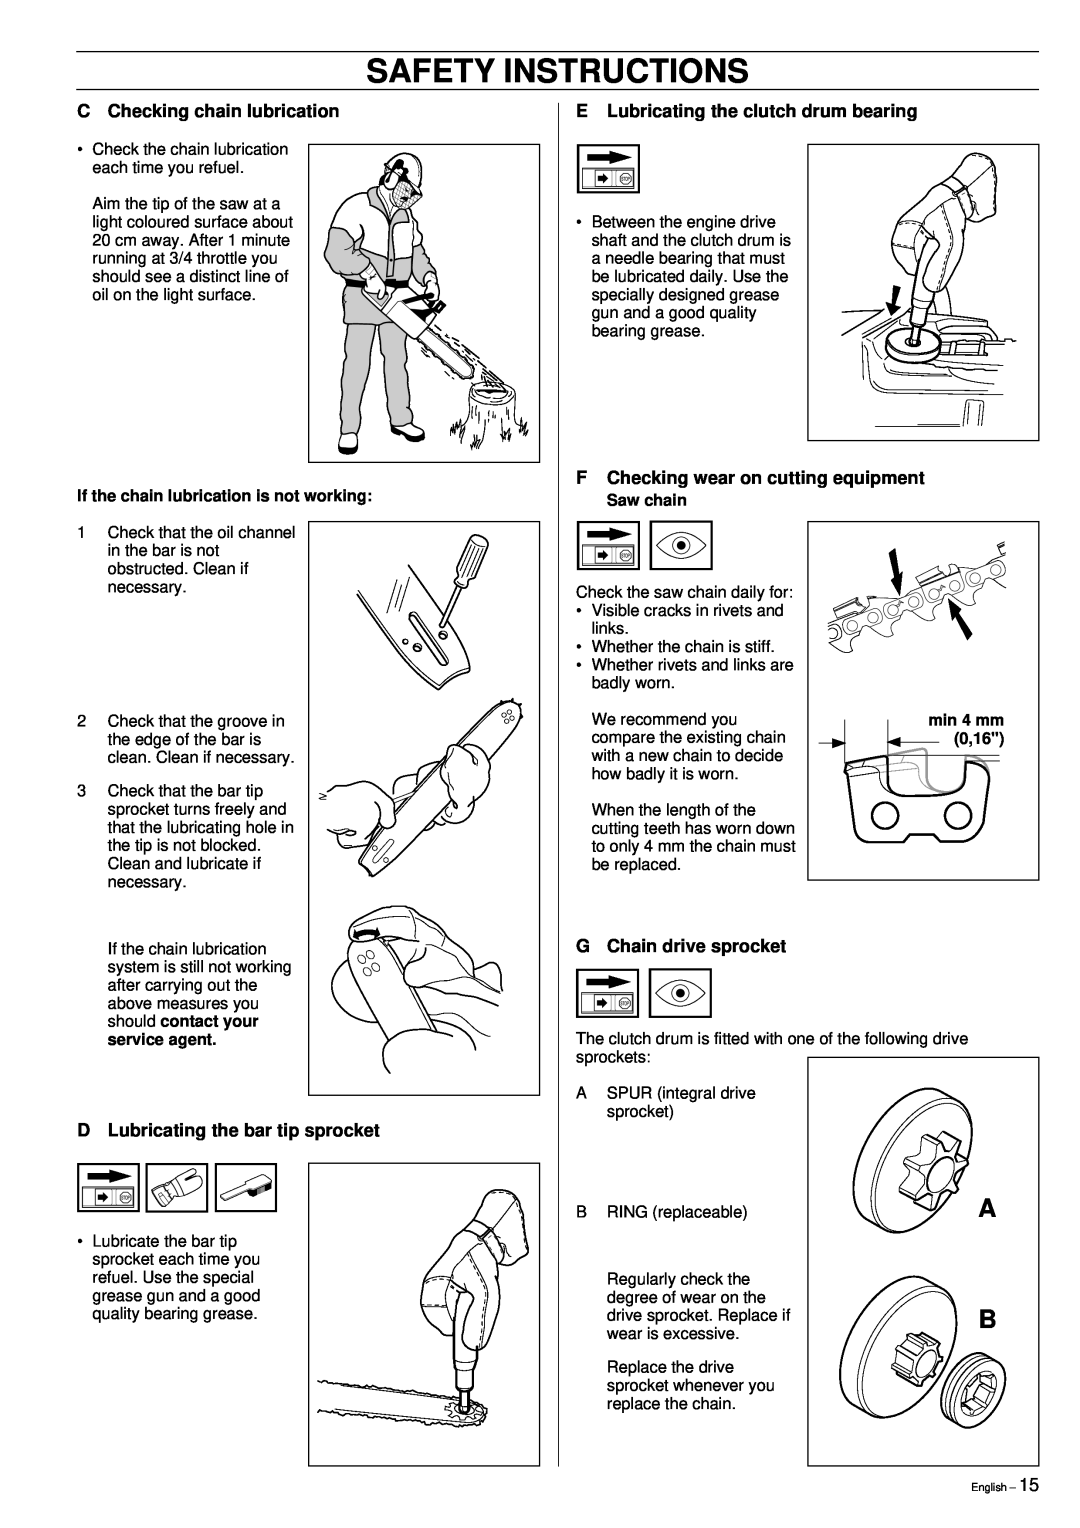 Husqvarna 51 manual Safety Instructions, C Checking chain lubrication, E Lubricating the clutch drum bearing 